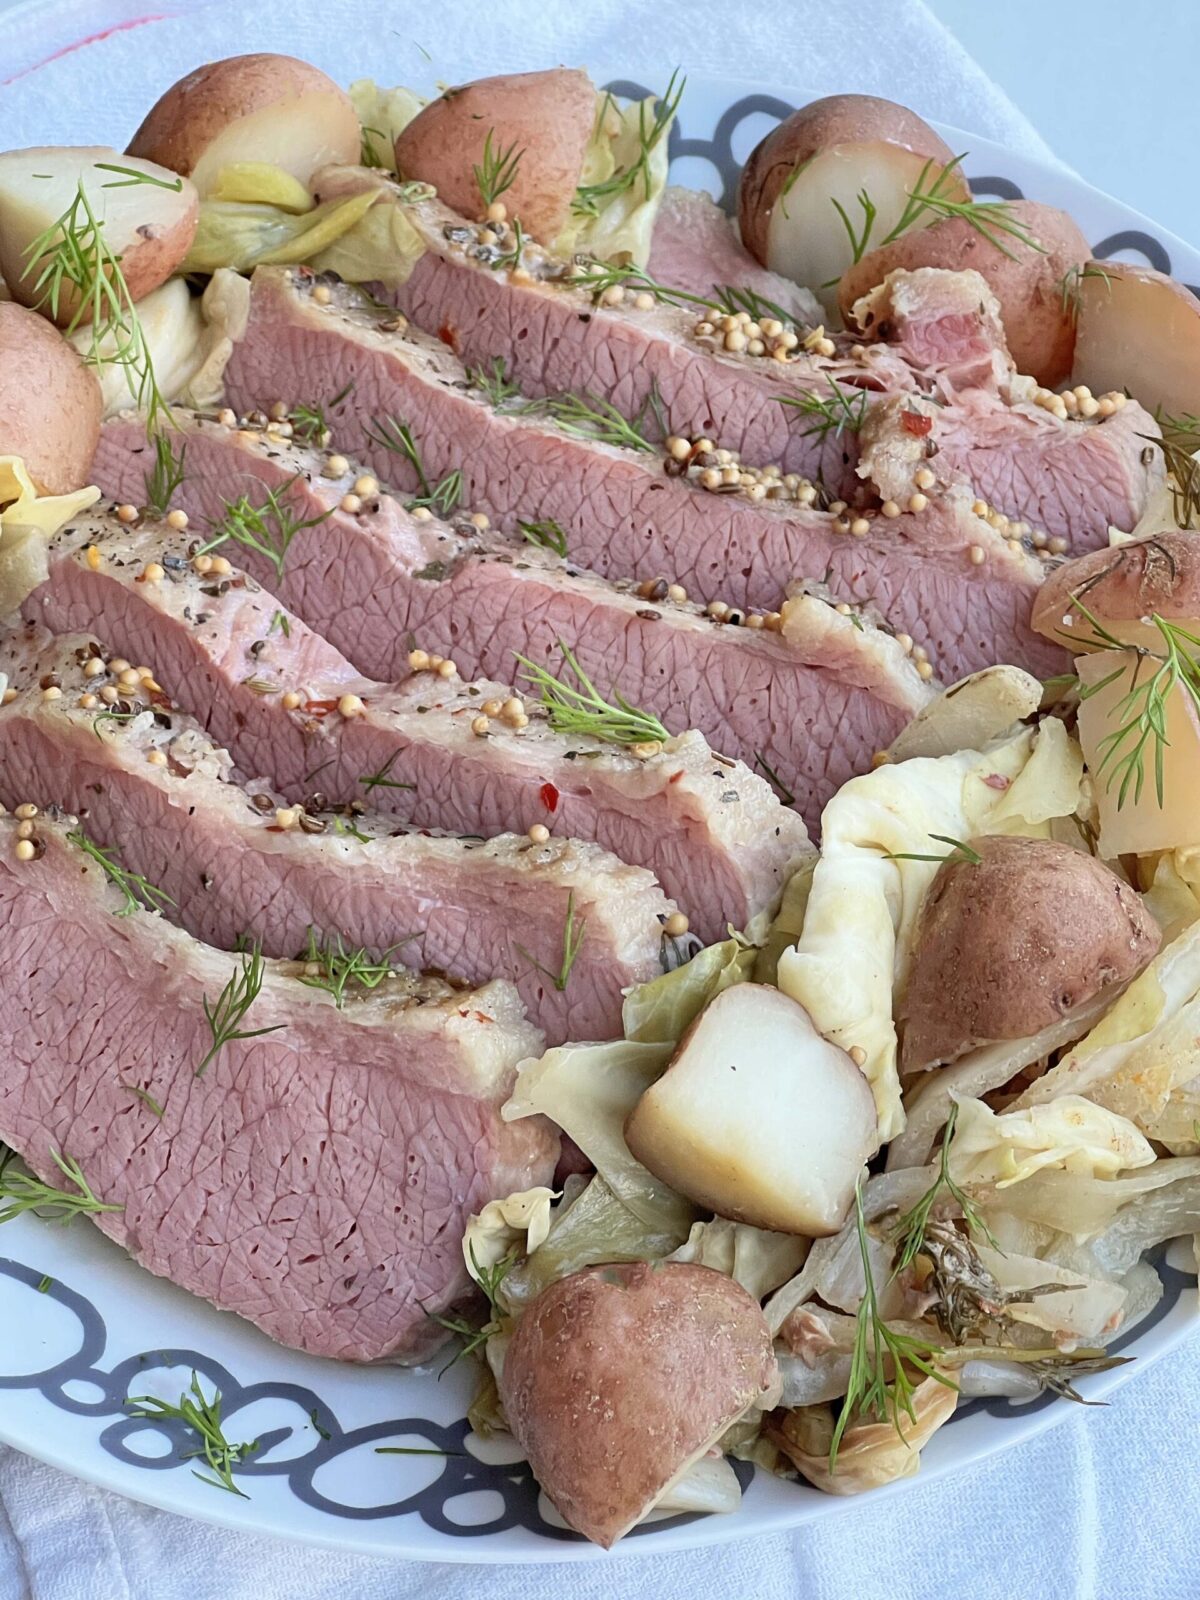 How to Make Corn Beef and Cabbage Recipe. This is an easy slow cooker recipe that is perfect for St. Patricks Day or an easy meal prep dinner for the week. Happy Cooking! www.ChopHappy.com #St.PatricksDayrecipe #cornbeefand cabbage